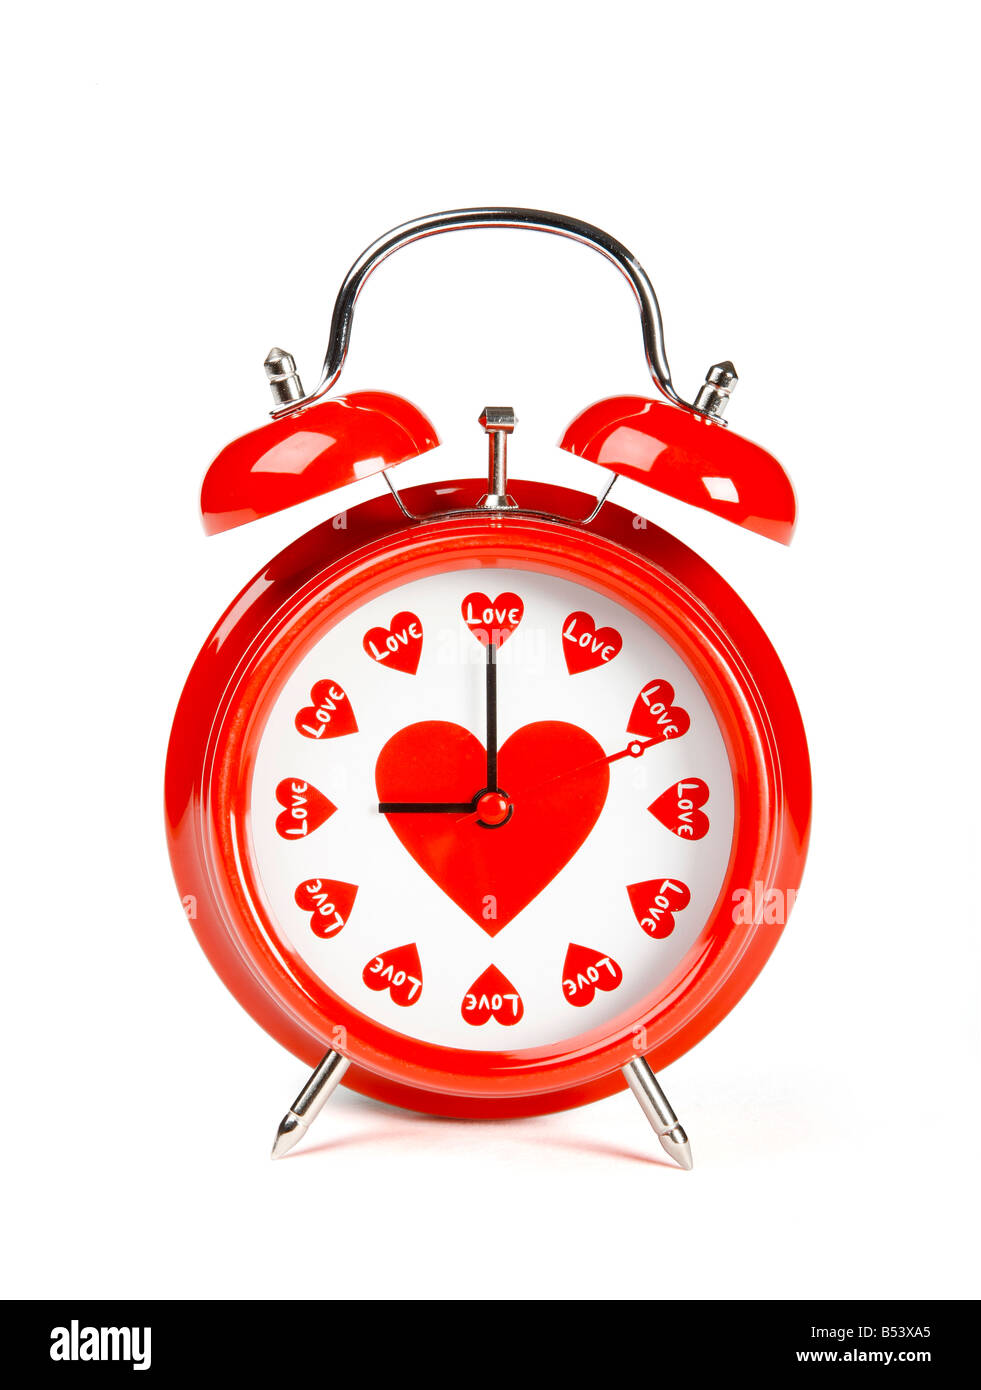 Concept image Alarm clock with every hour set on love Stock Photo - Alamy